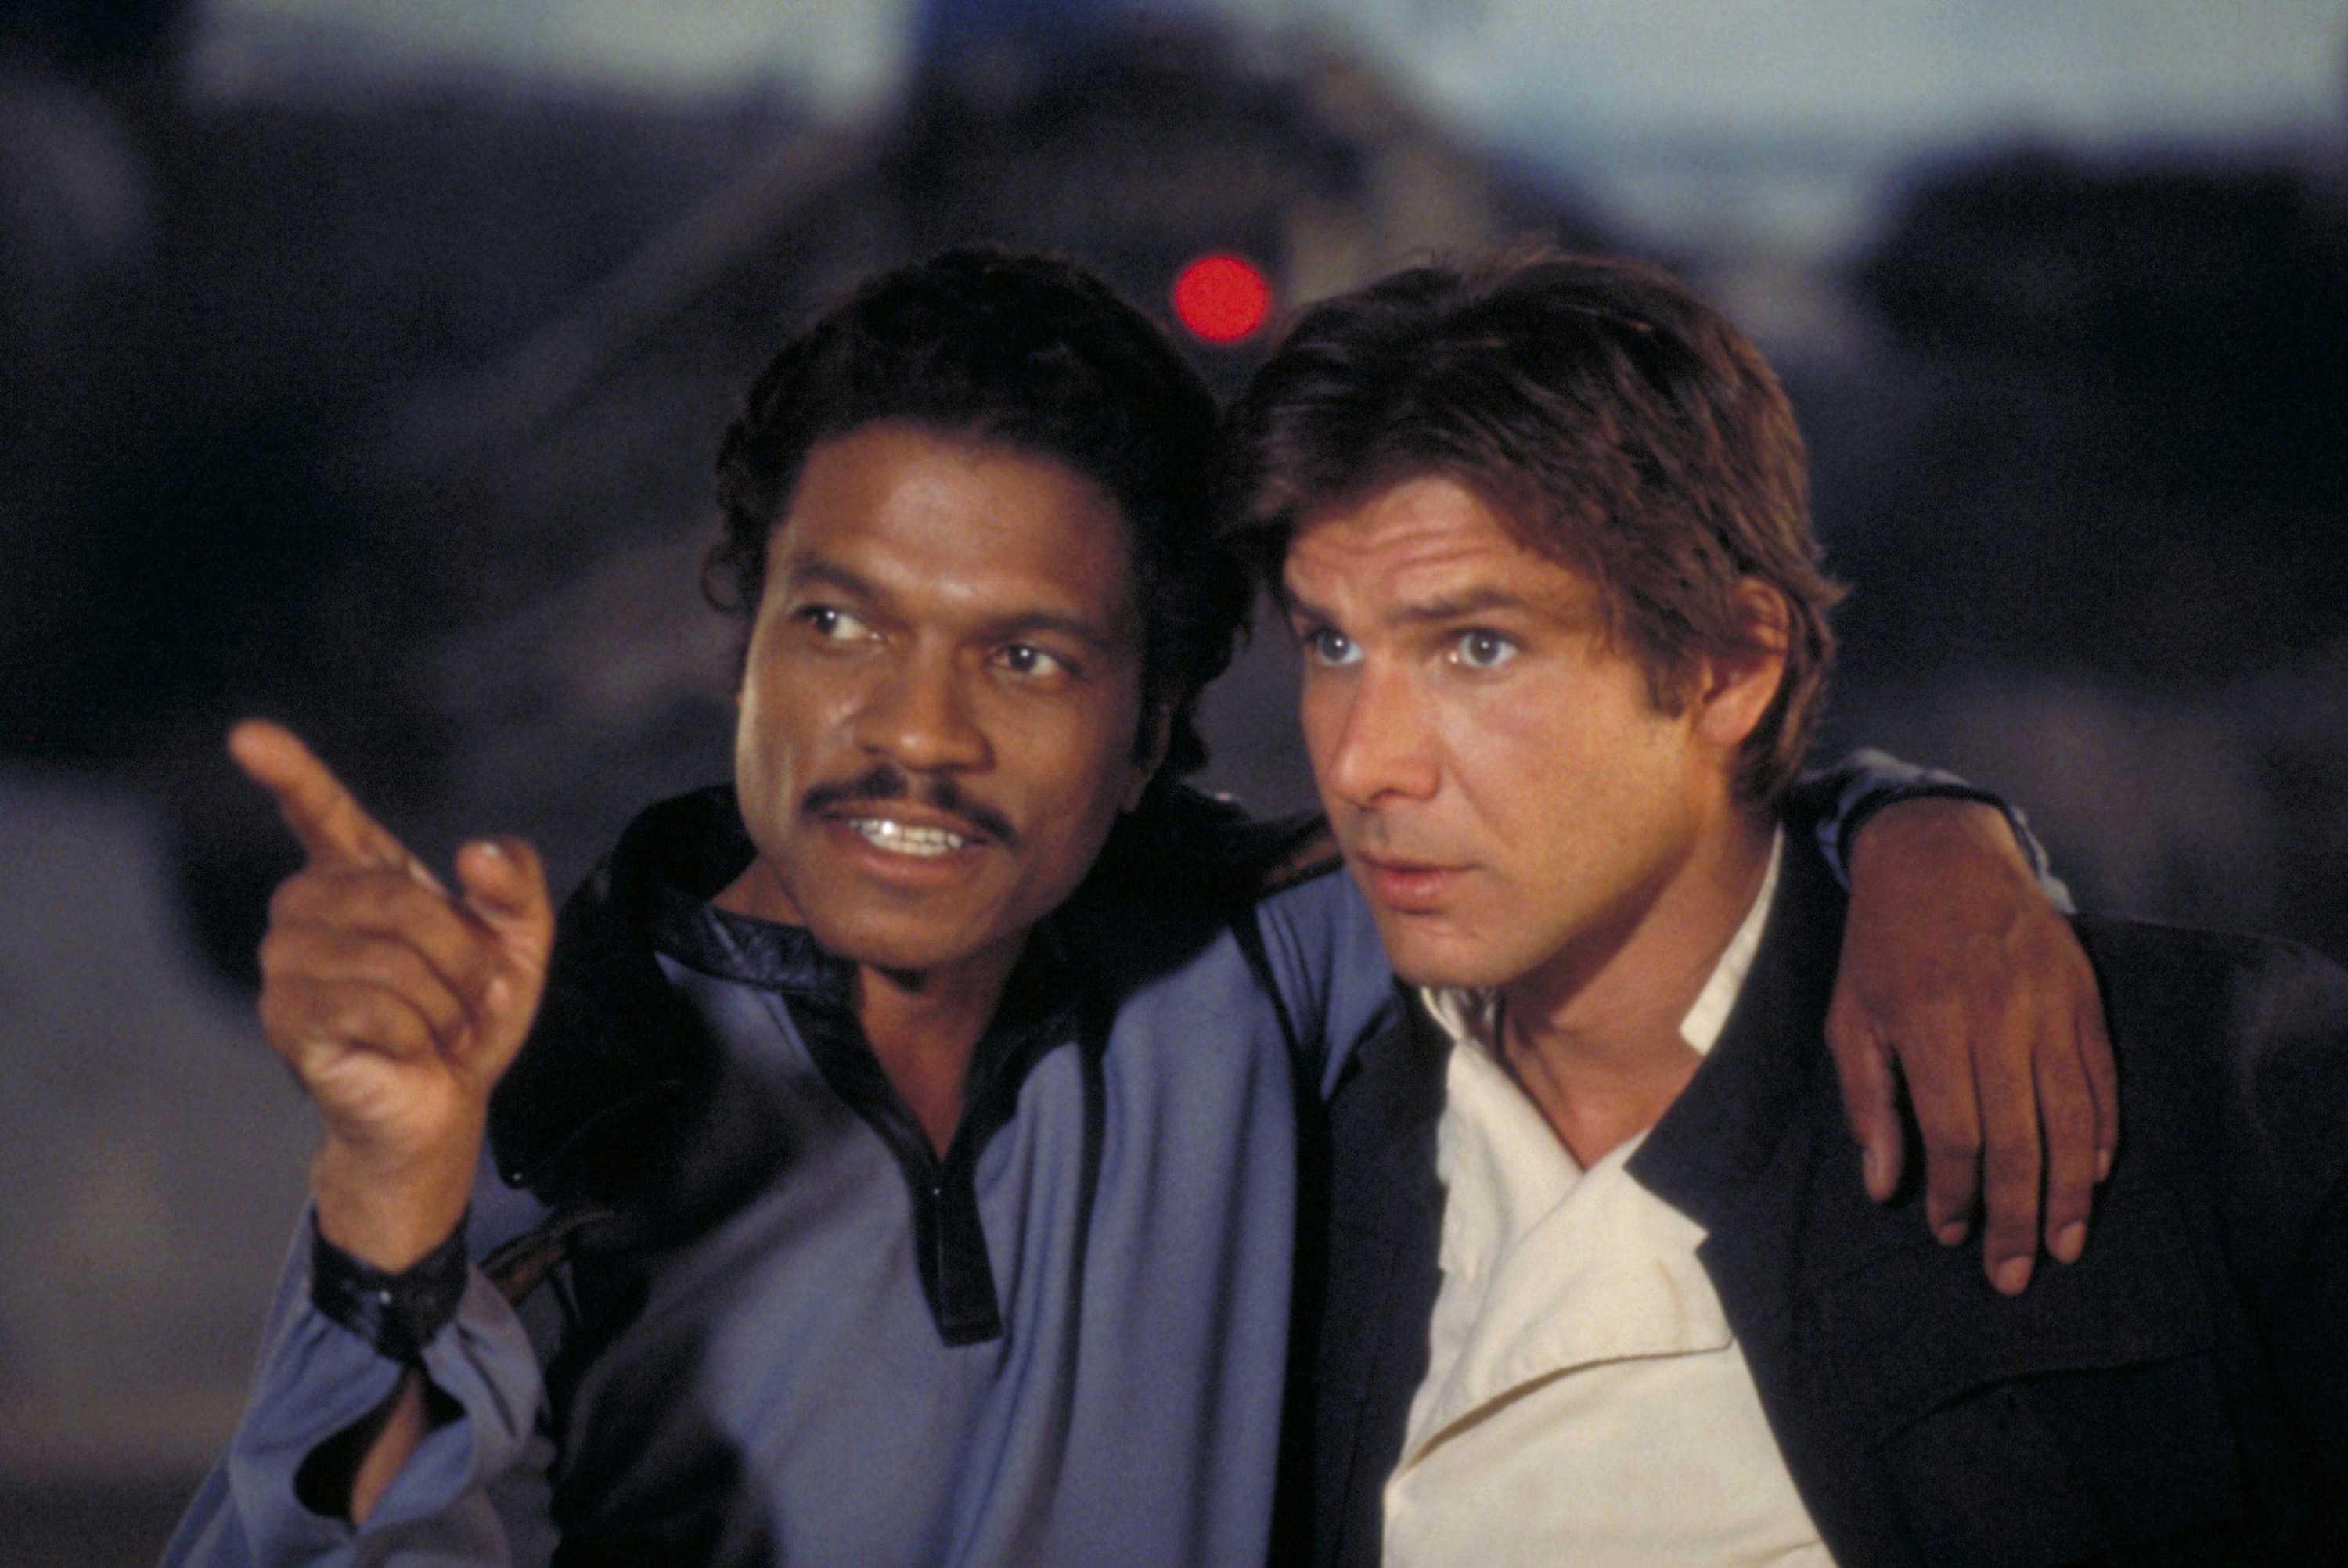 Billy Dee Williams has his arm around Harrison Ford pointing to something off in the distance.